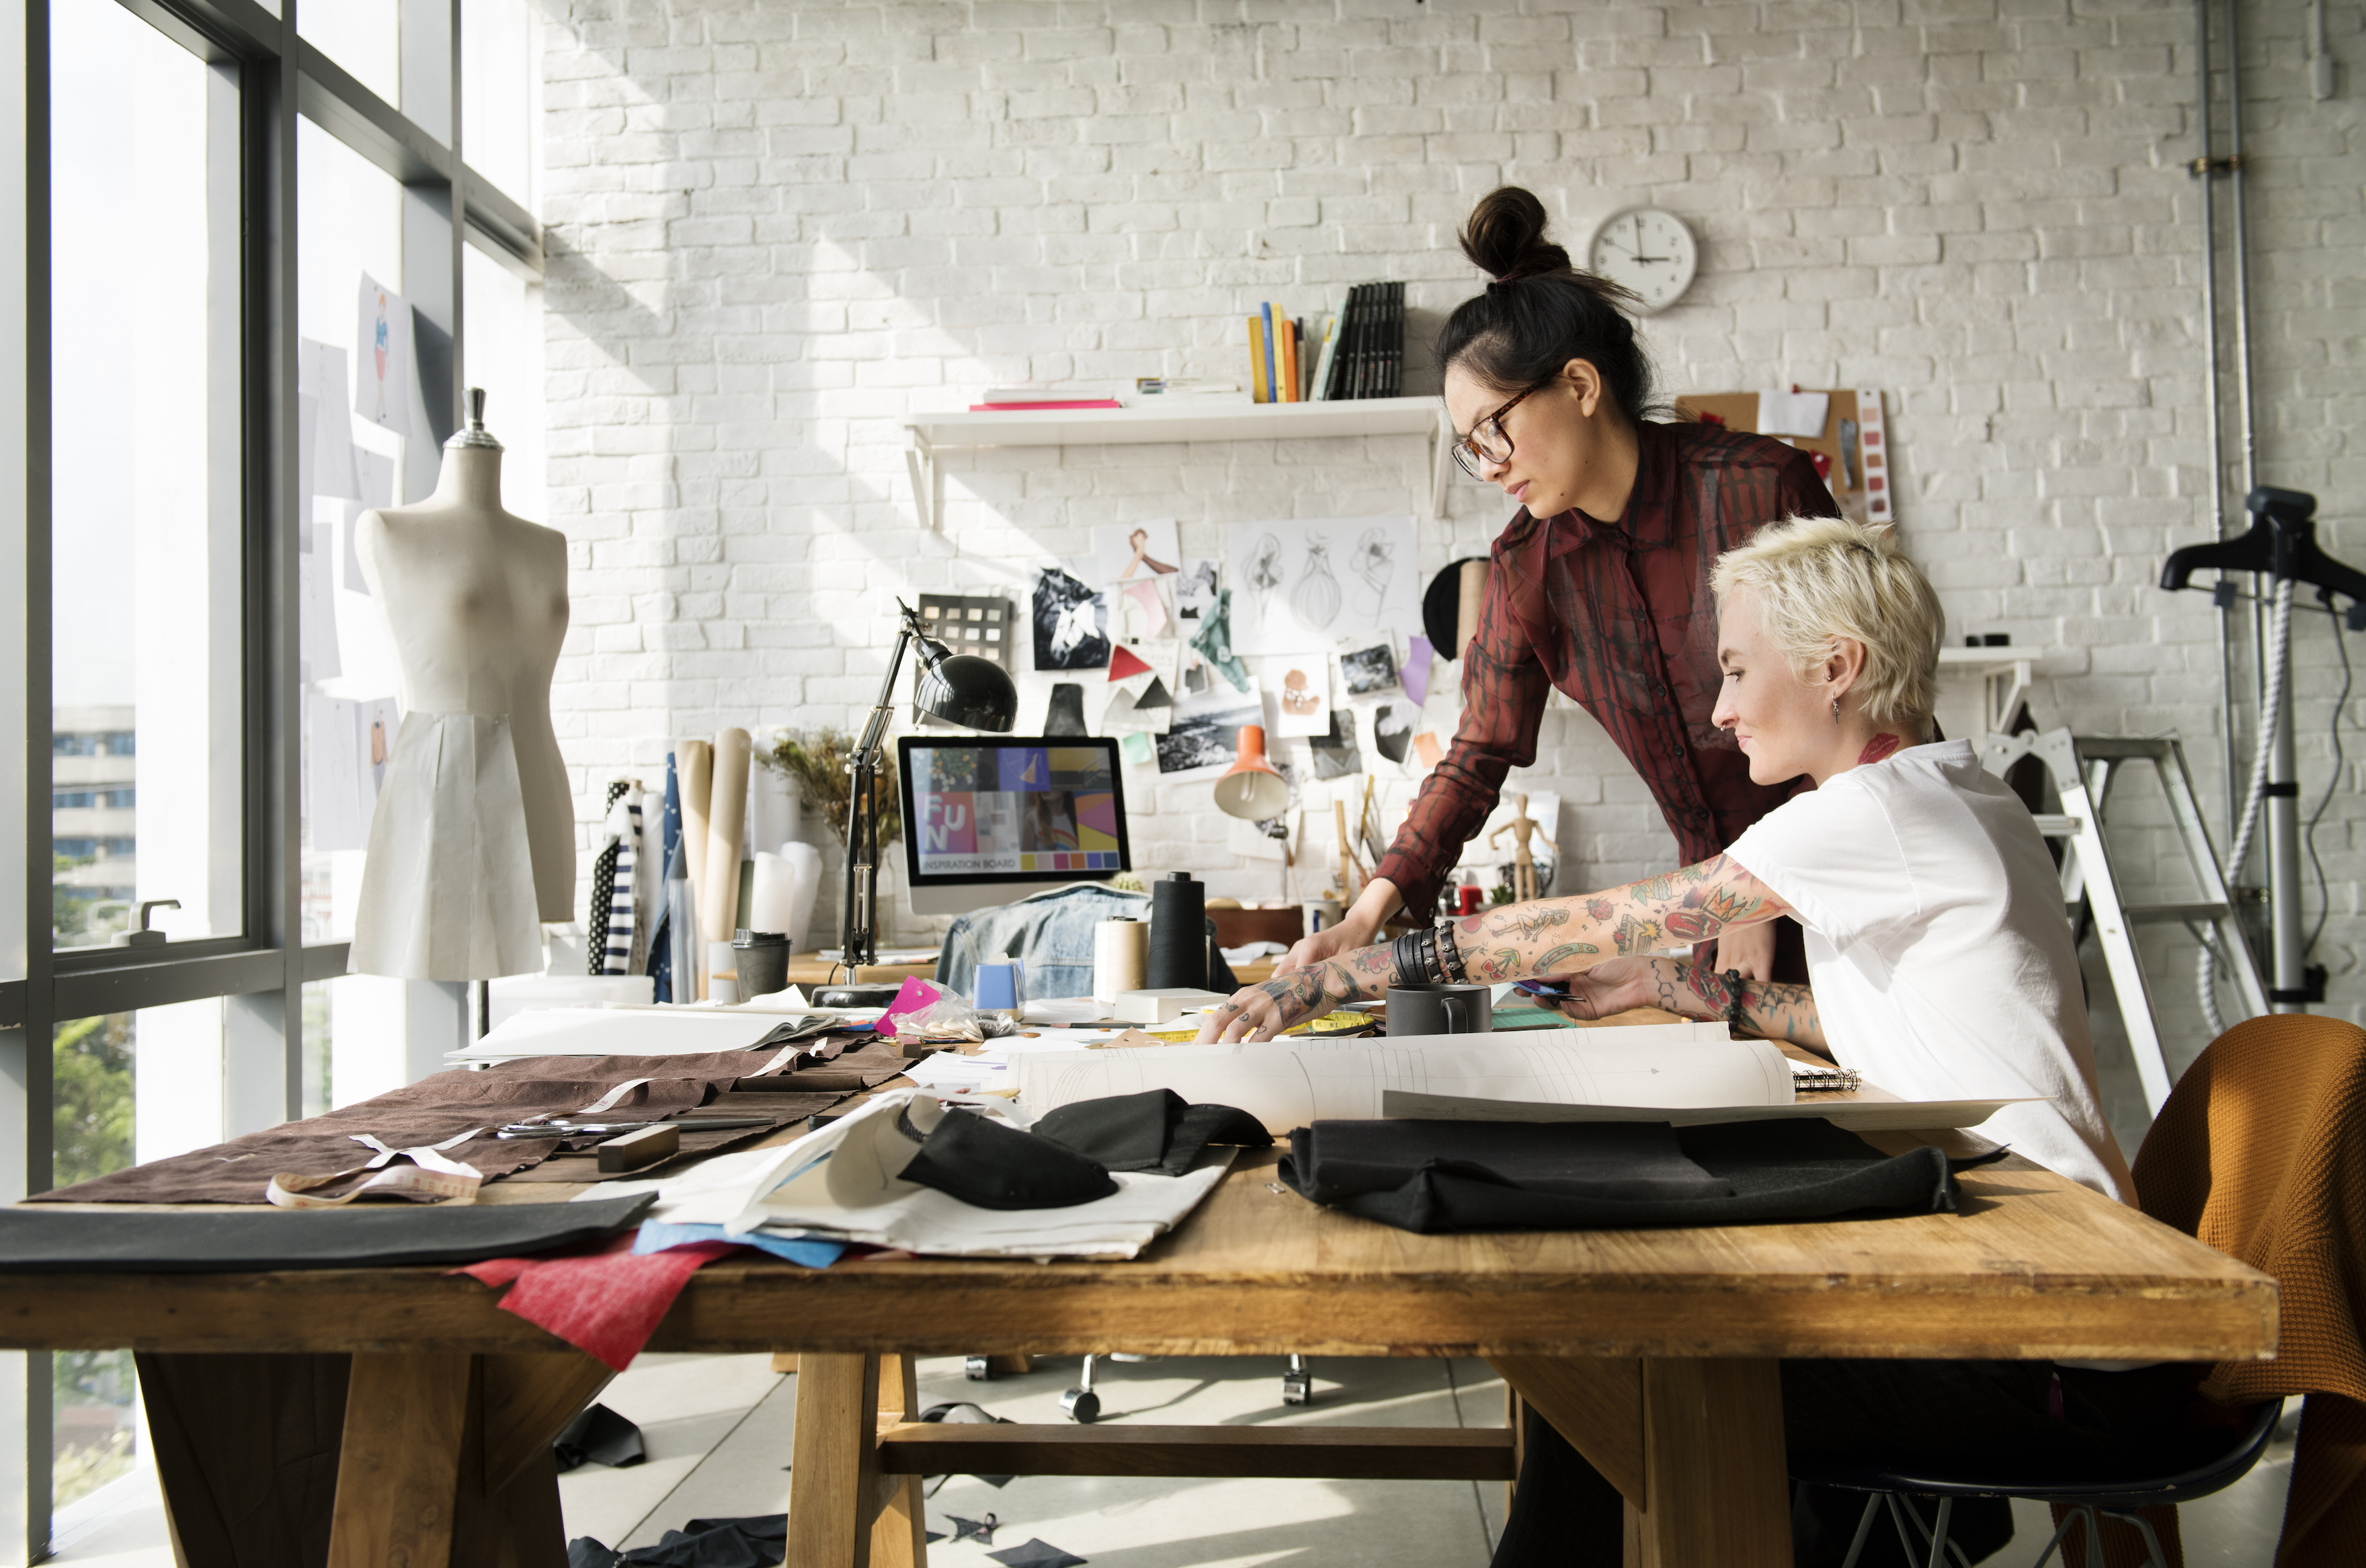 Entering the Fashion Industry? Common Interview Questions to Prep For